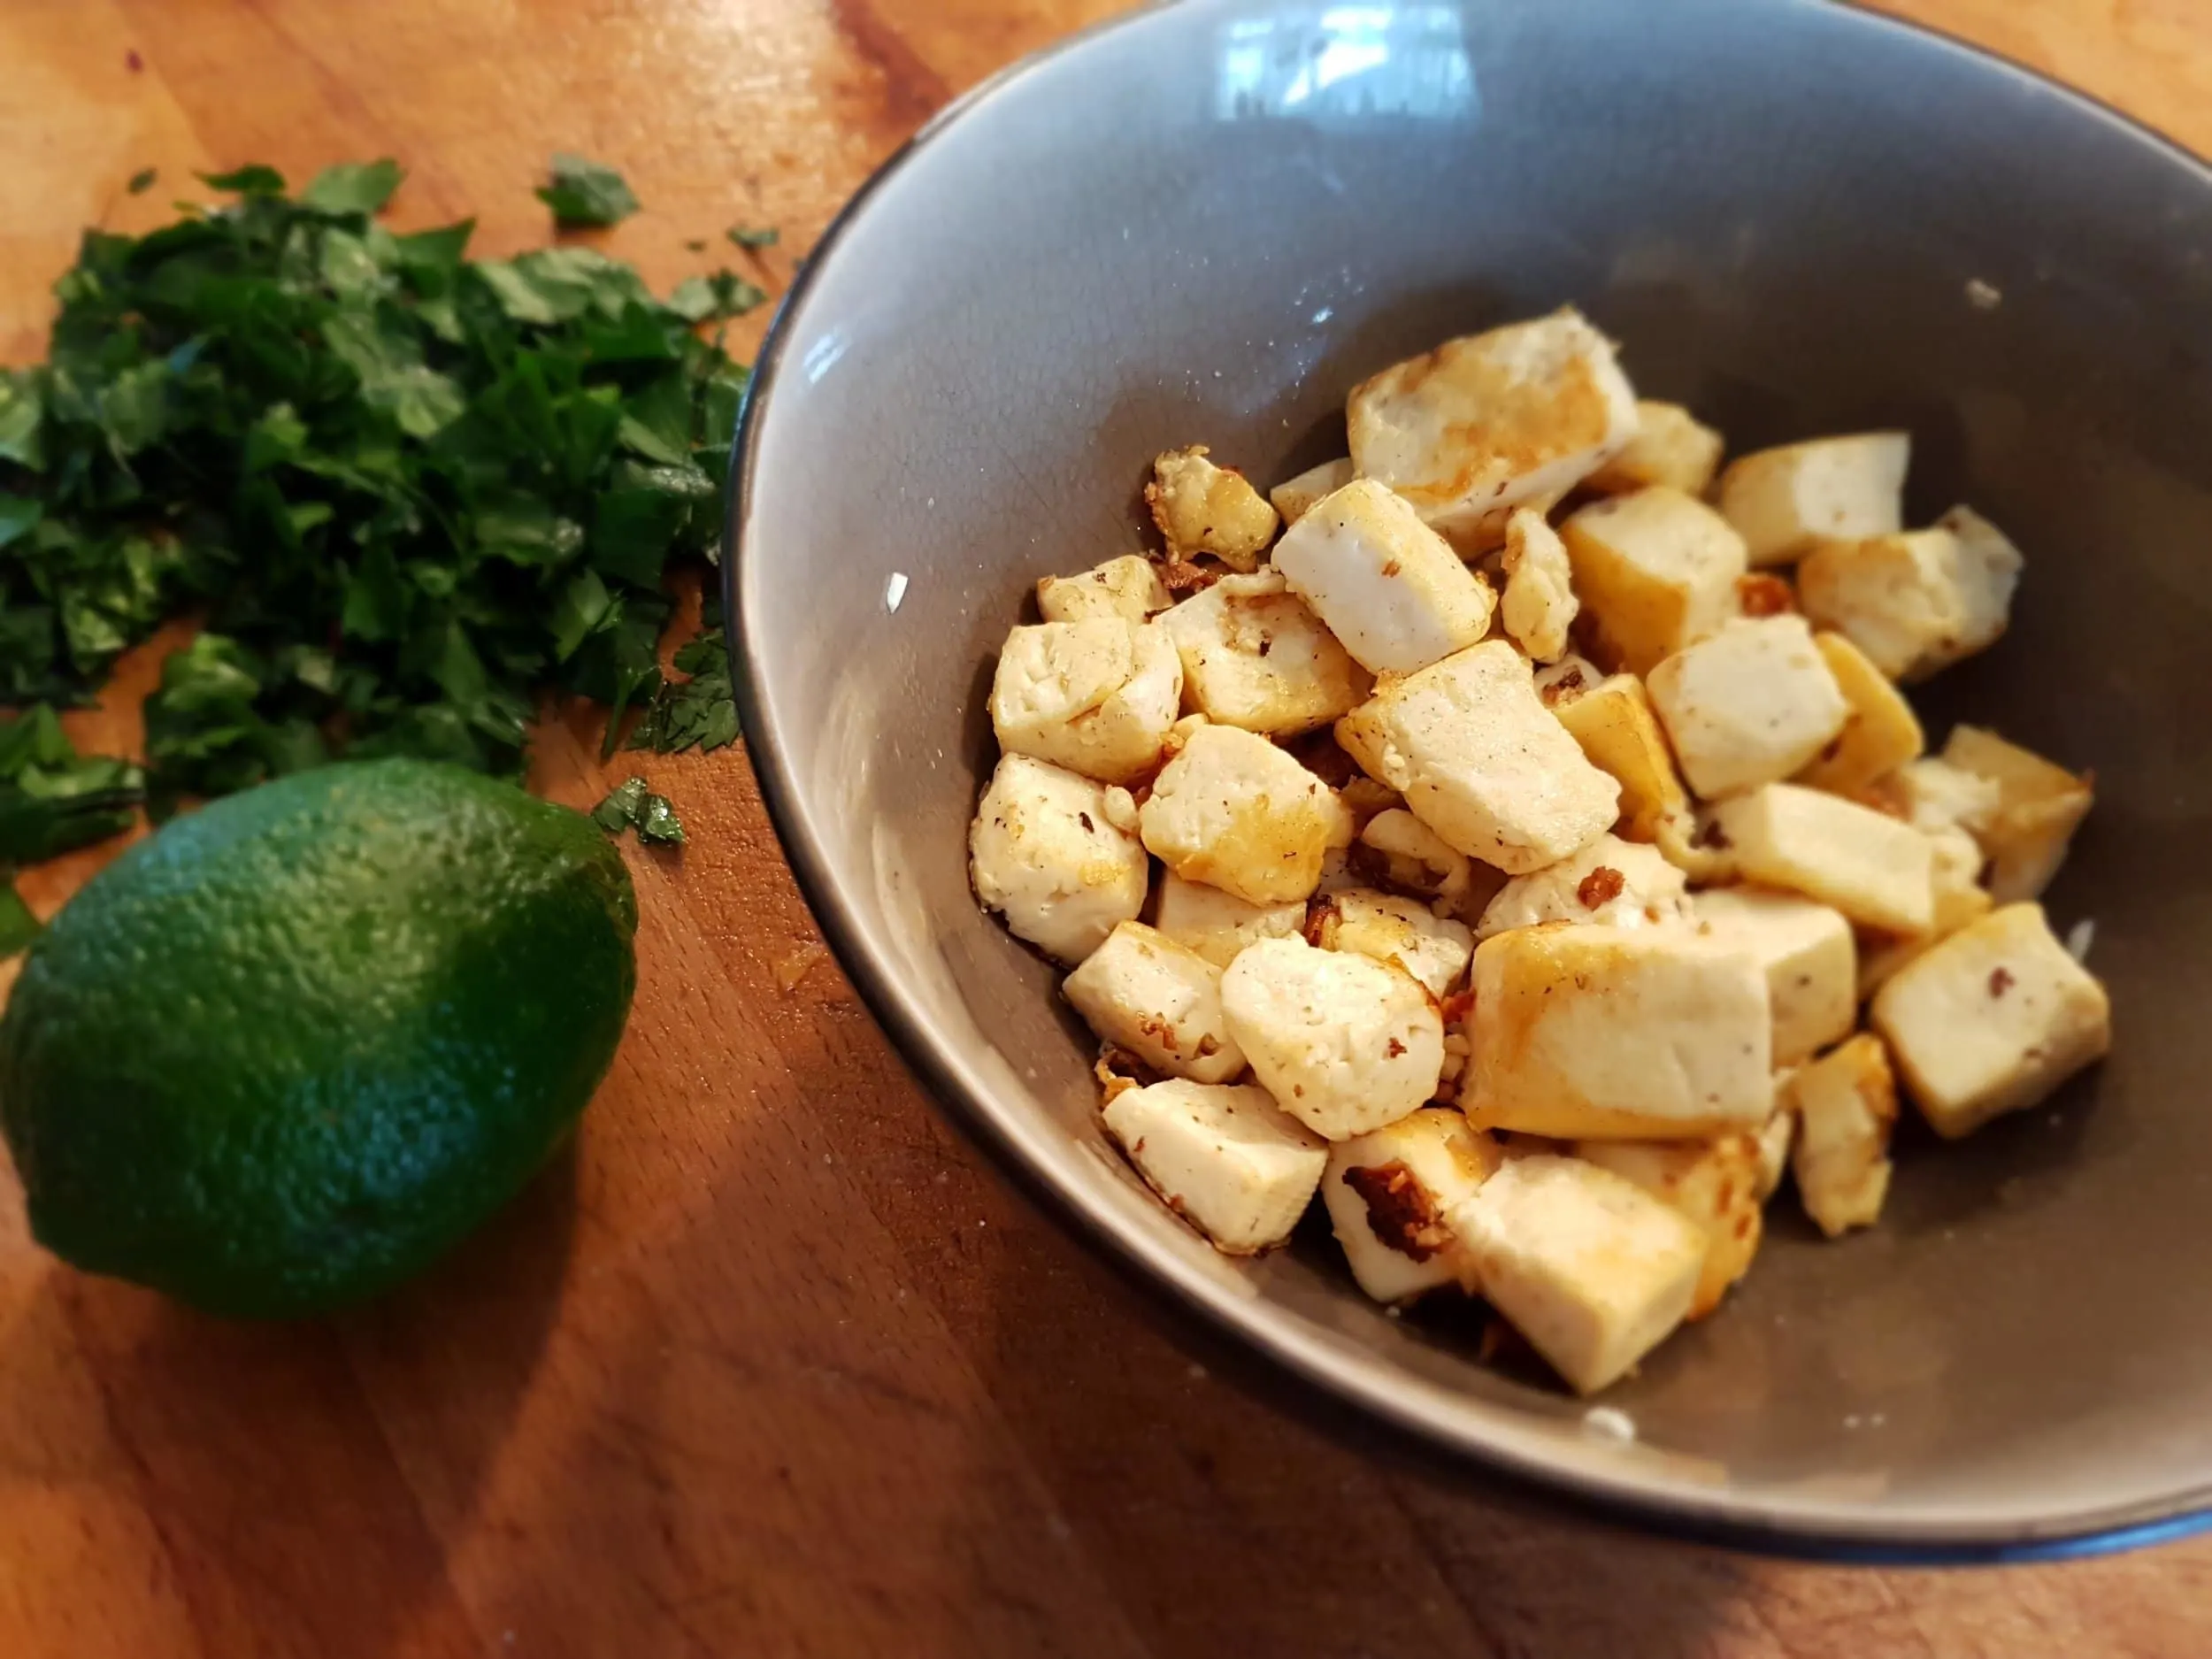 Cooked tofu in a bowl with parsley and lime on the side.